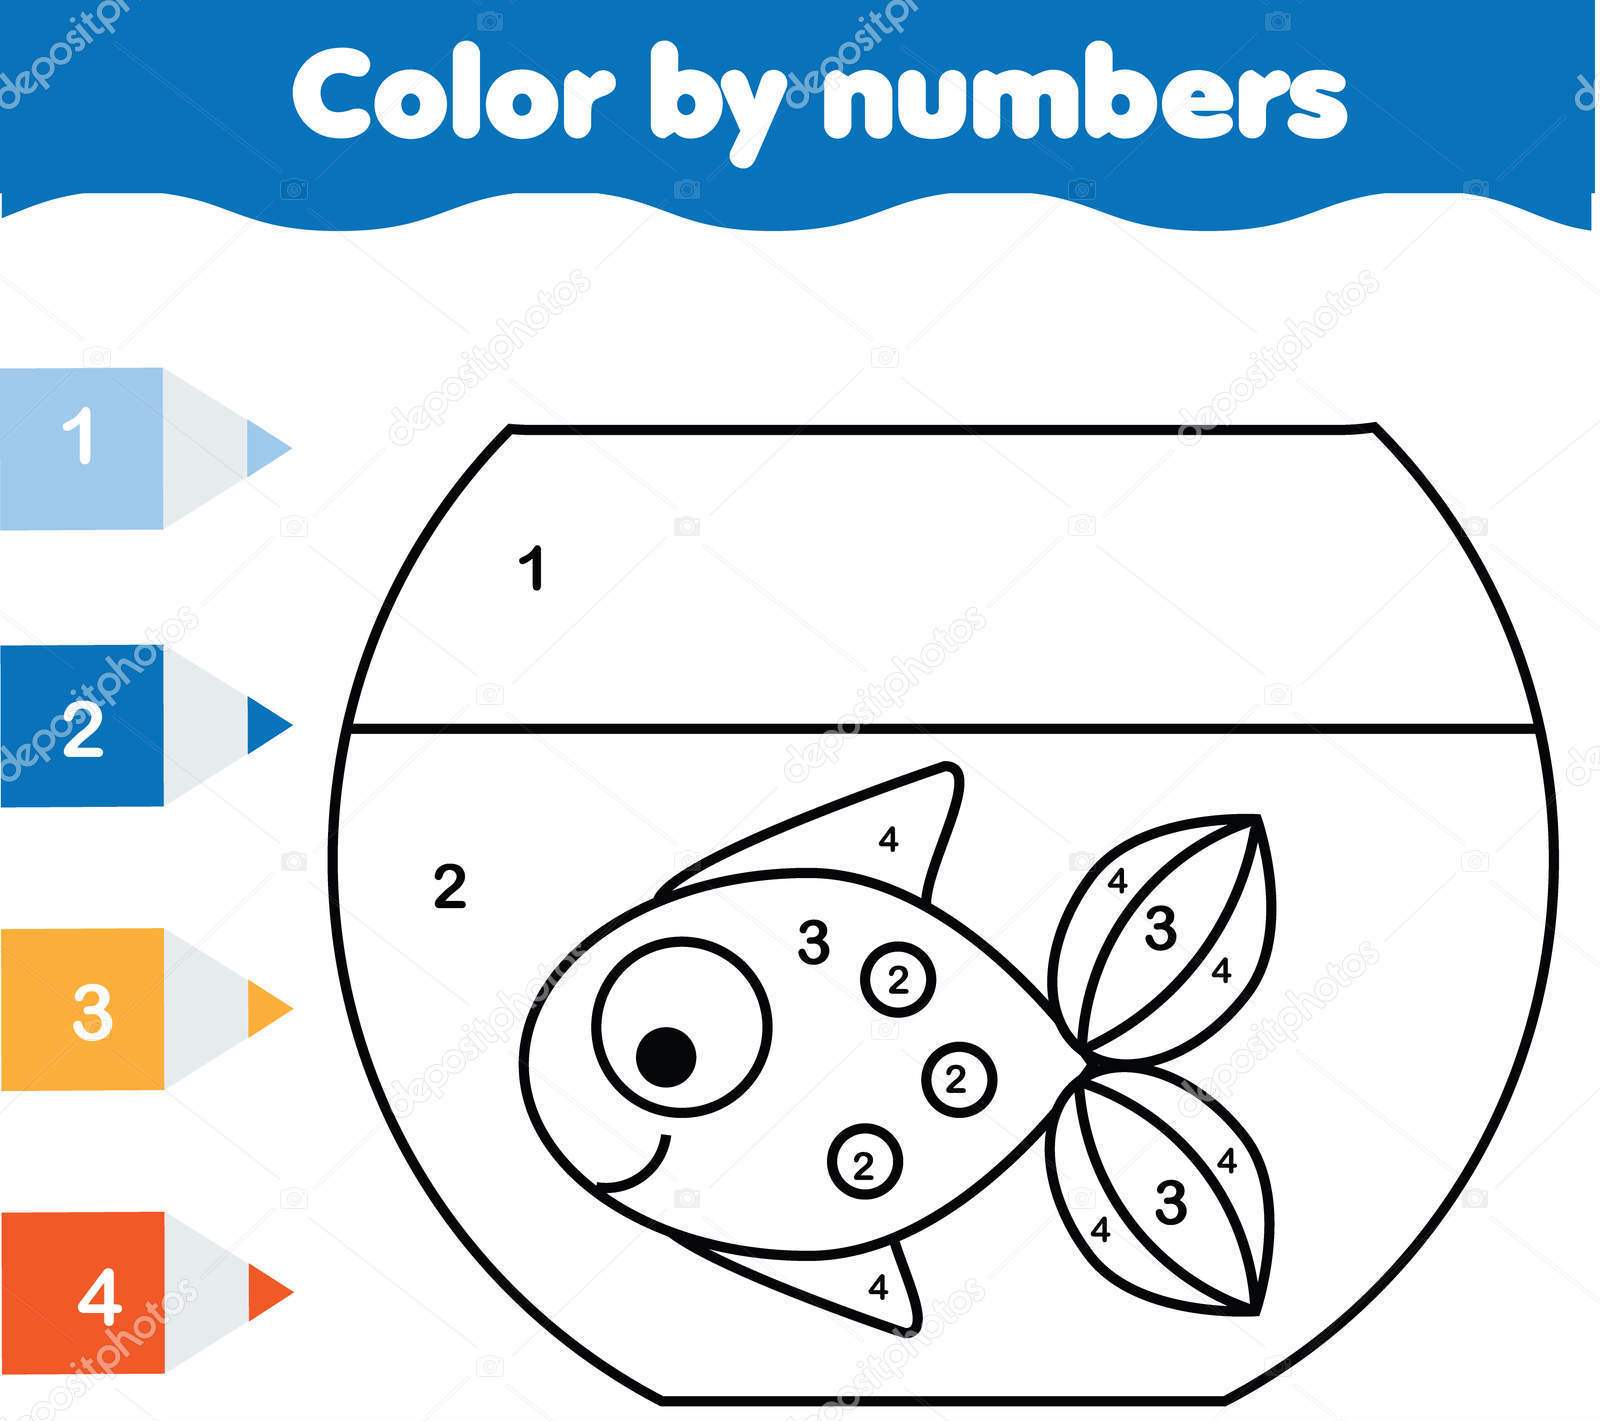 depositphotos_177559062-stock-illustration-children-educational-game-coloring-page.jpg